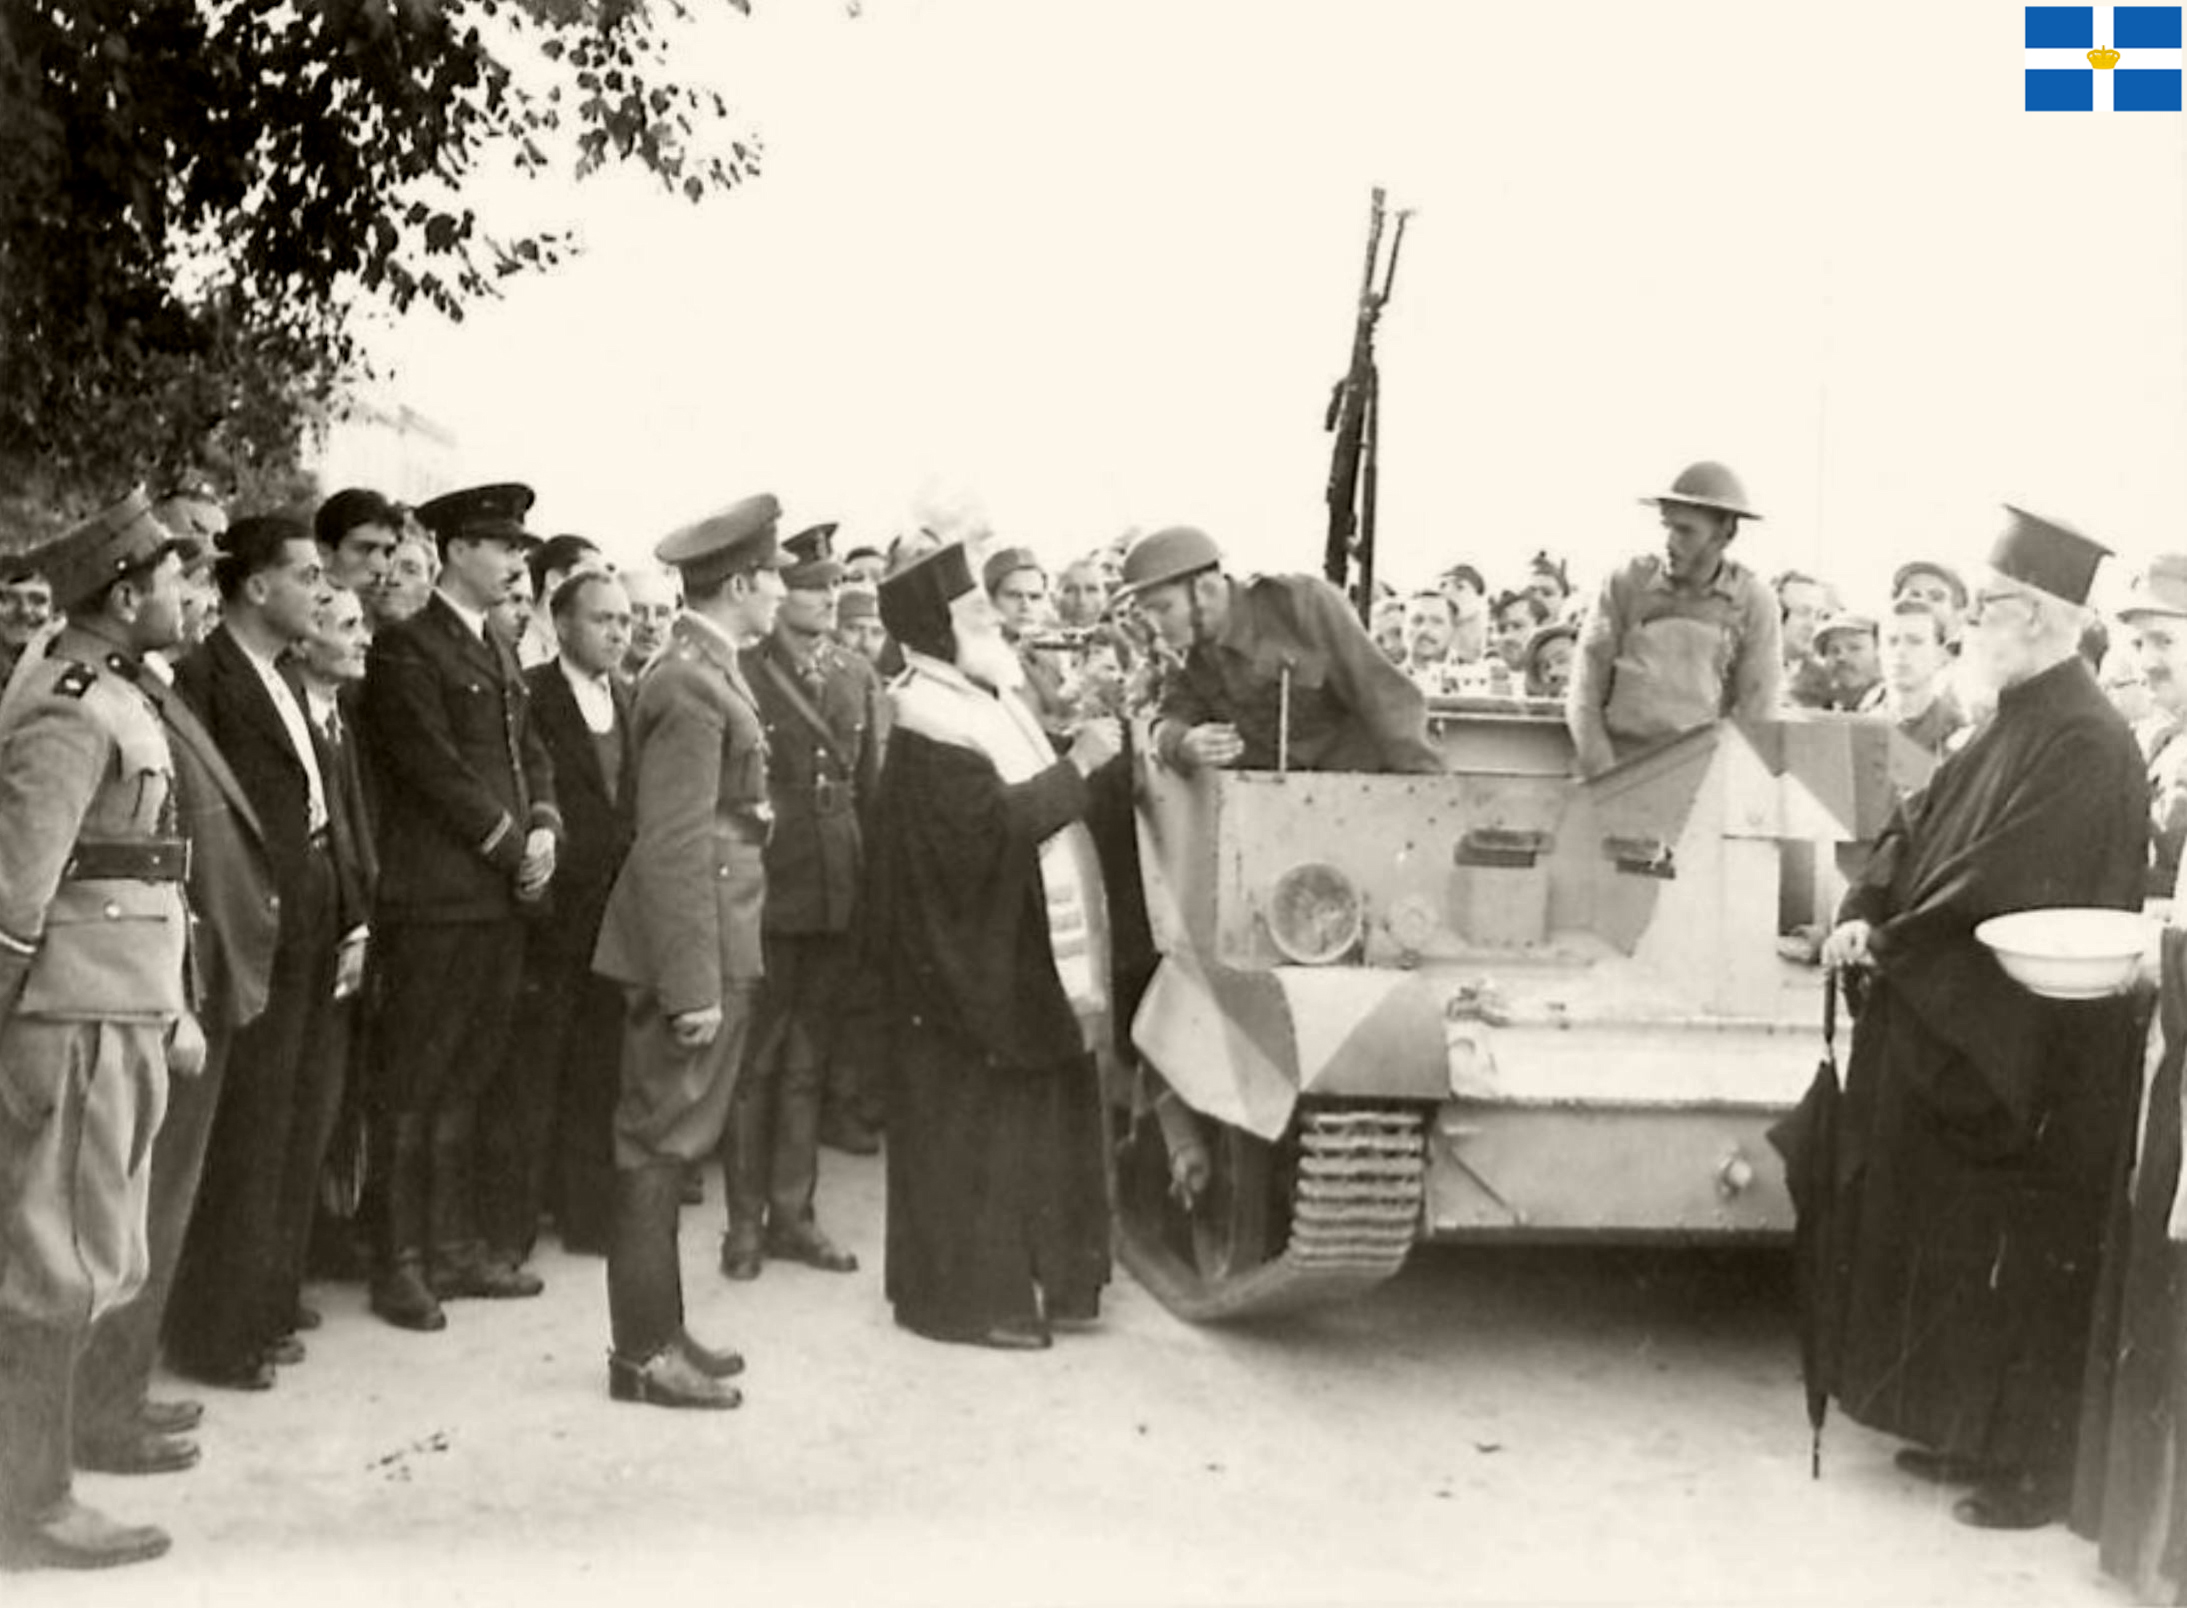 Bishop of Canea blessing Bren carriers and light tanks Crete 15 Oct 1940 IWM E1197